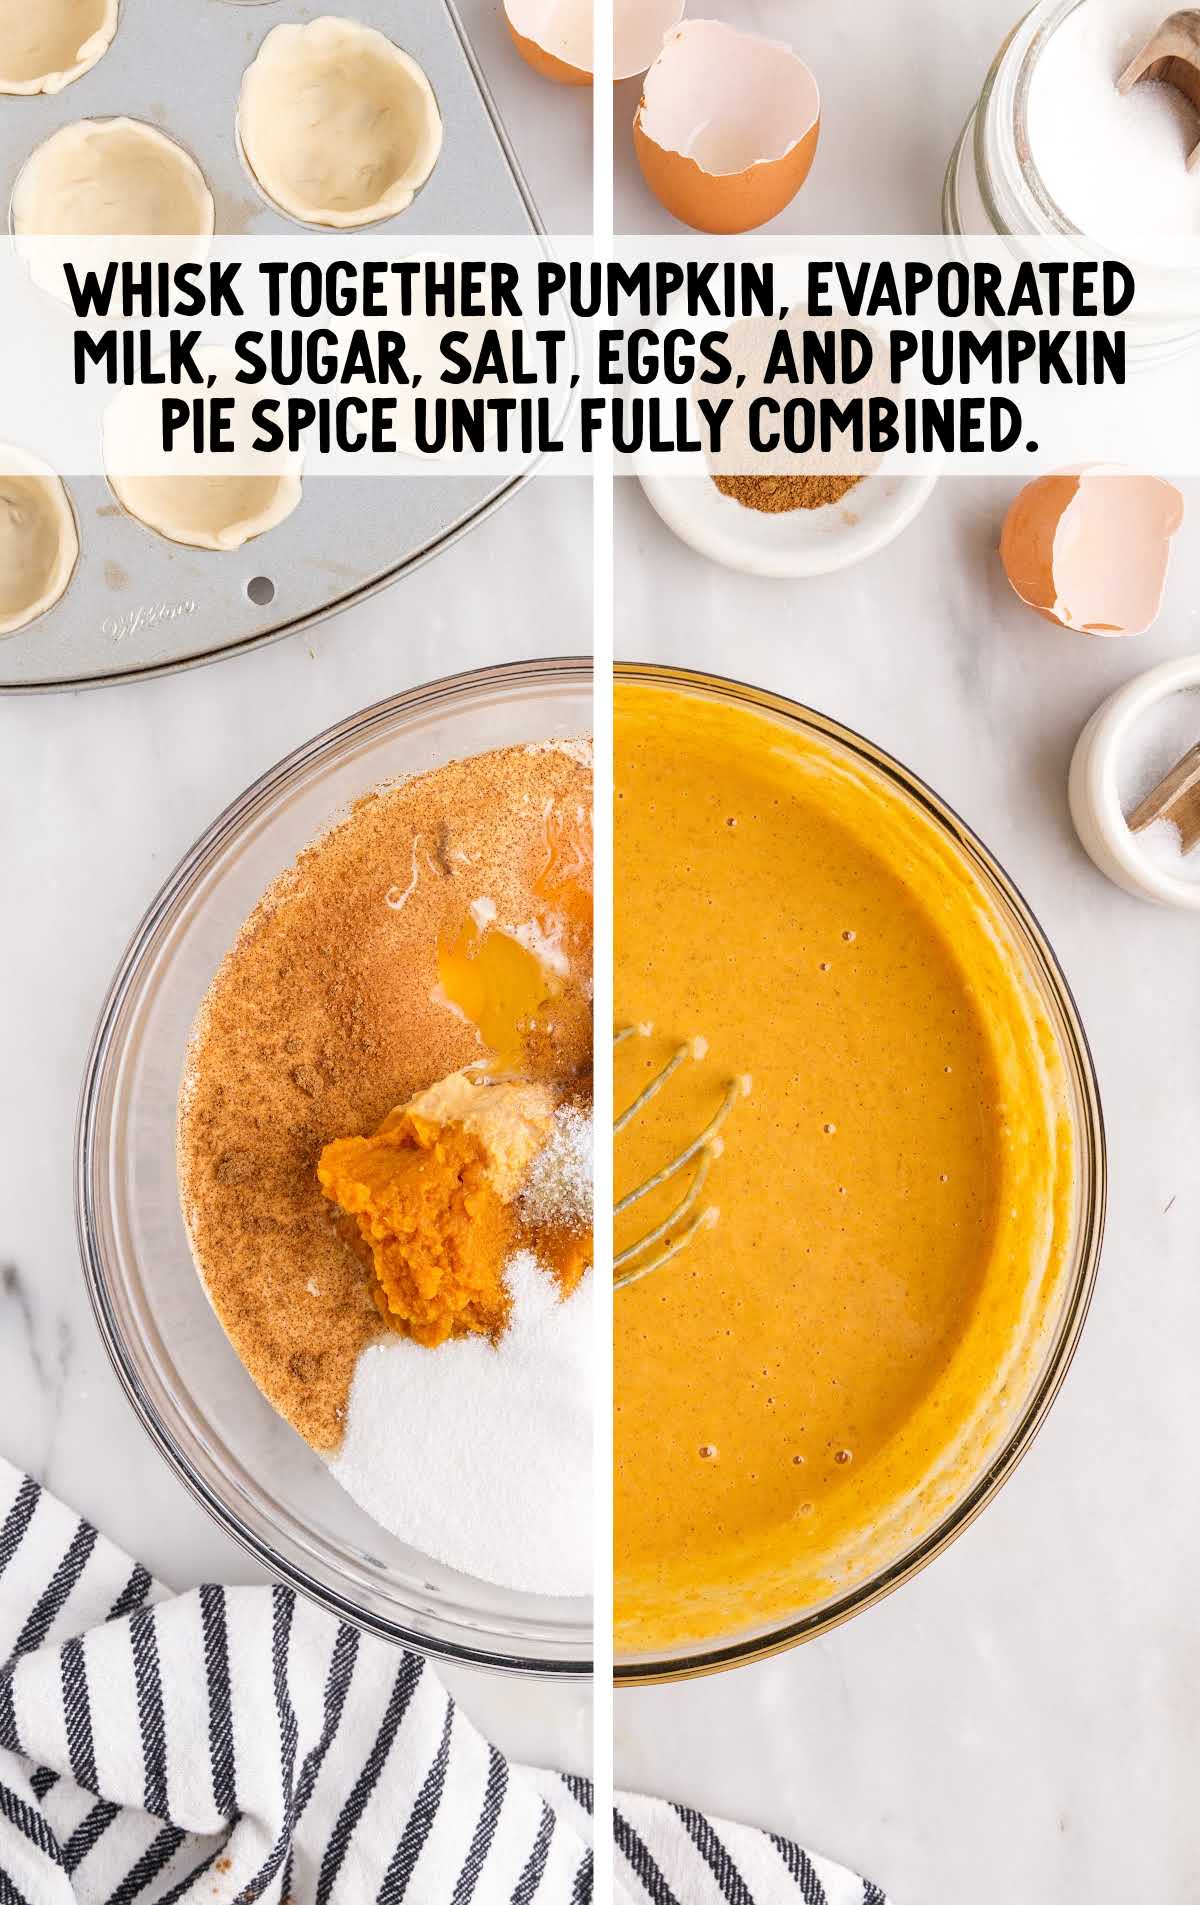 pumpkin, evaporated milk, salt, eggs, and pumpkin pie whisked together in a bowl